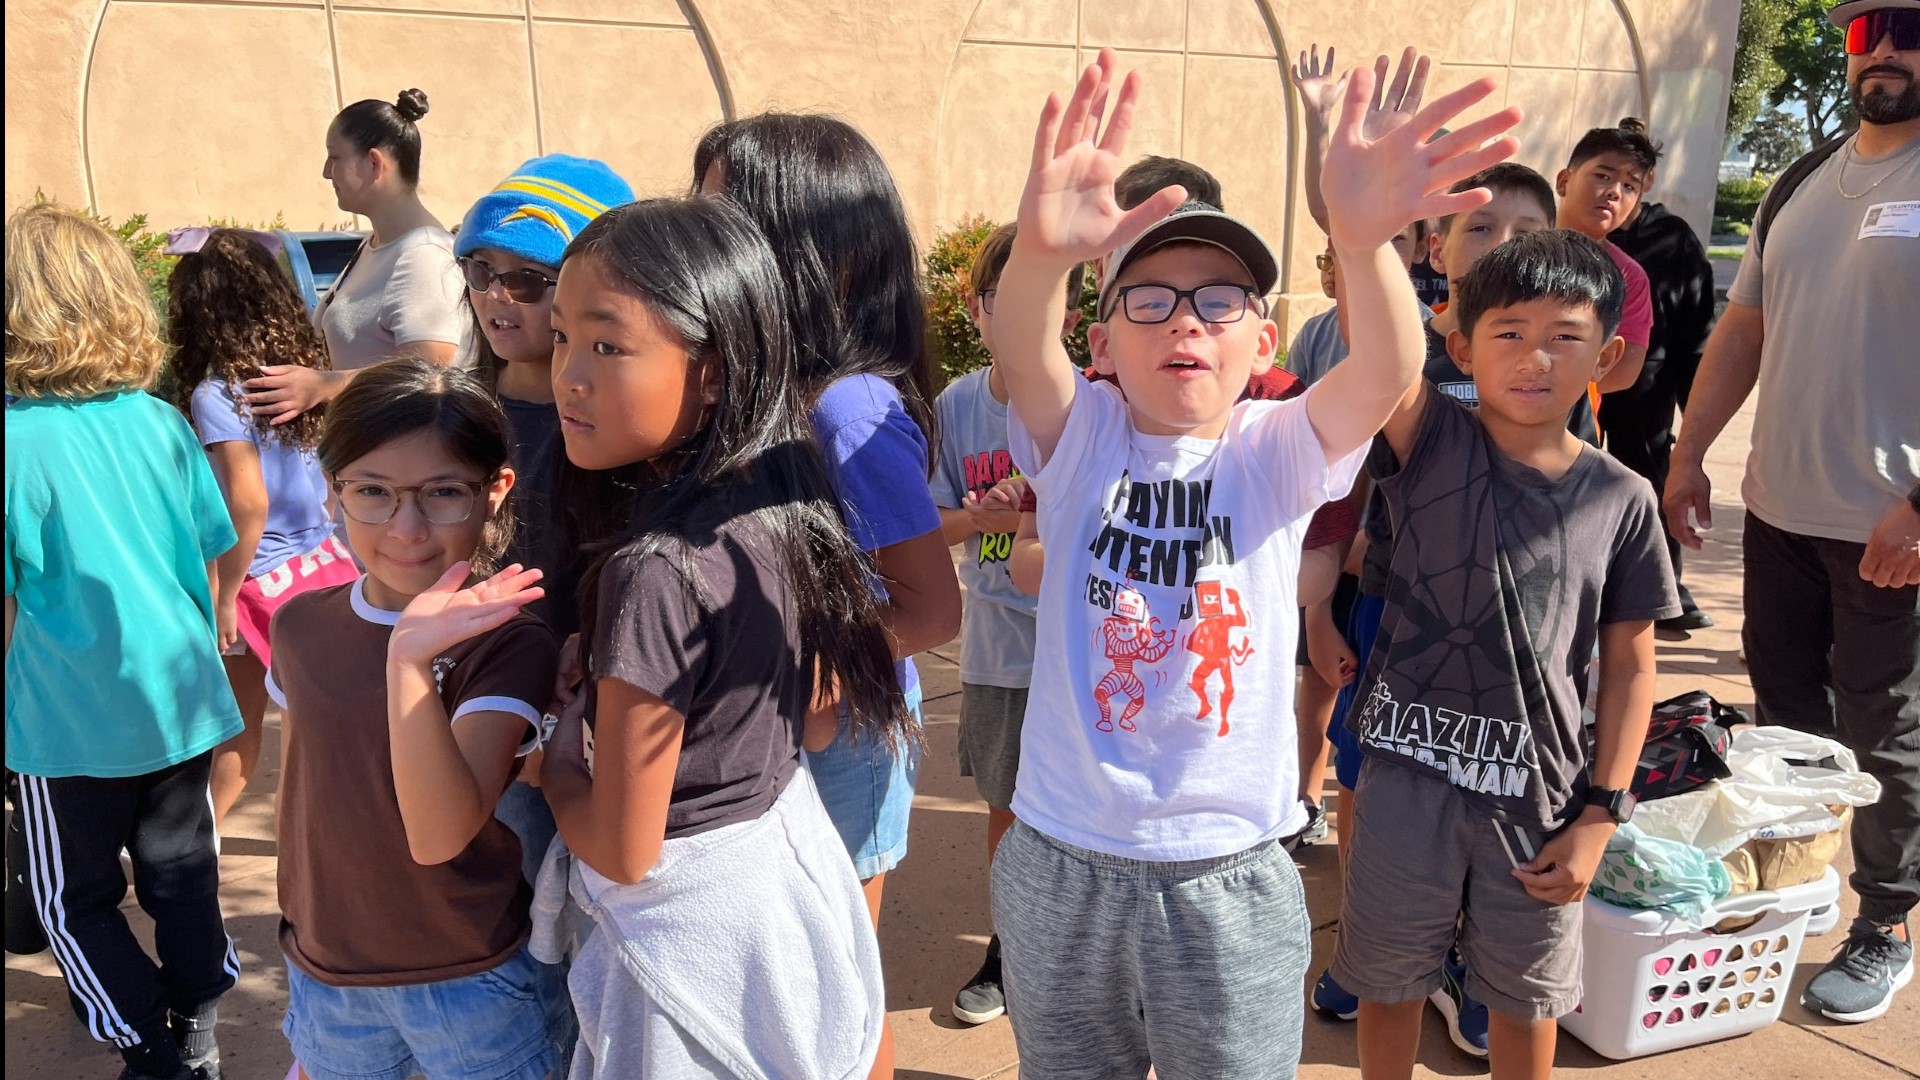 47,484 schoolchildren were sent to Balboa Park with a $140,000 grant from Patrons of the Prado.